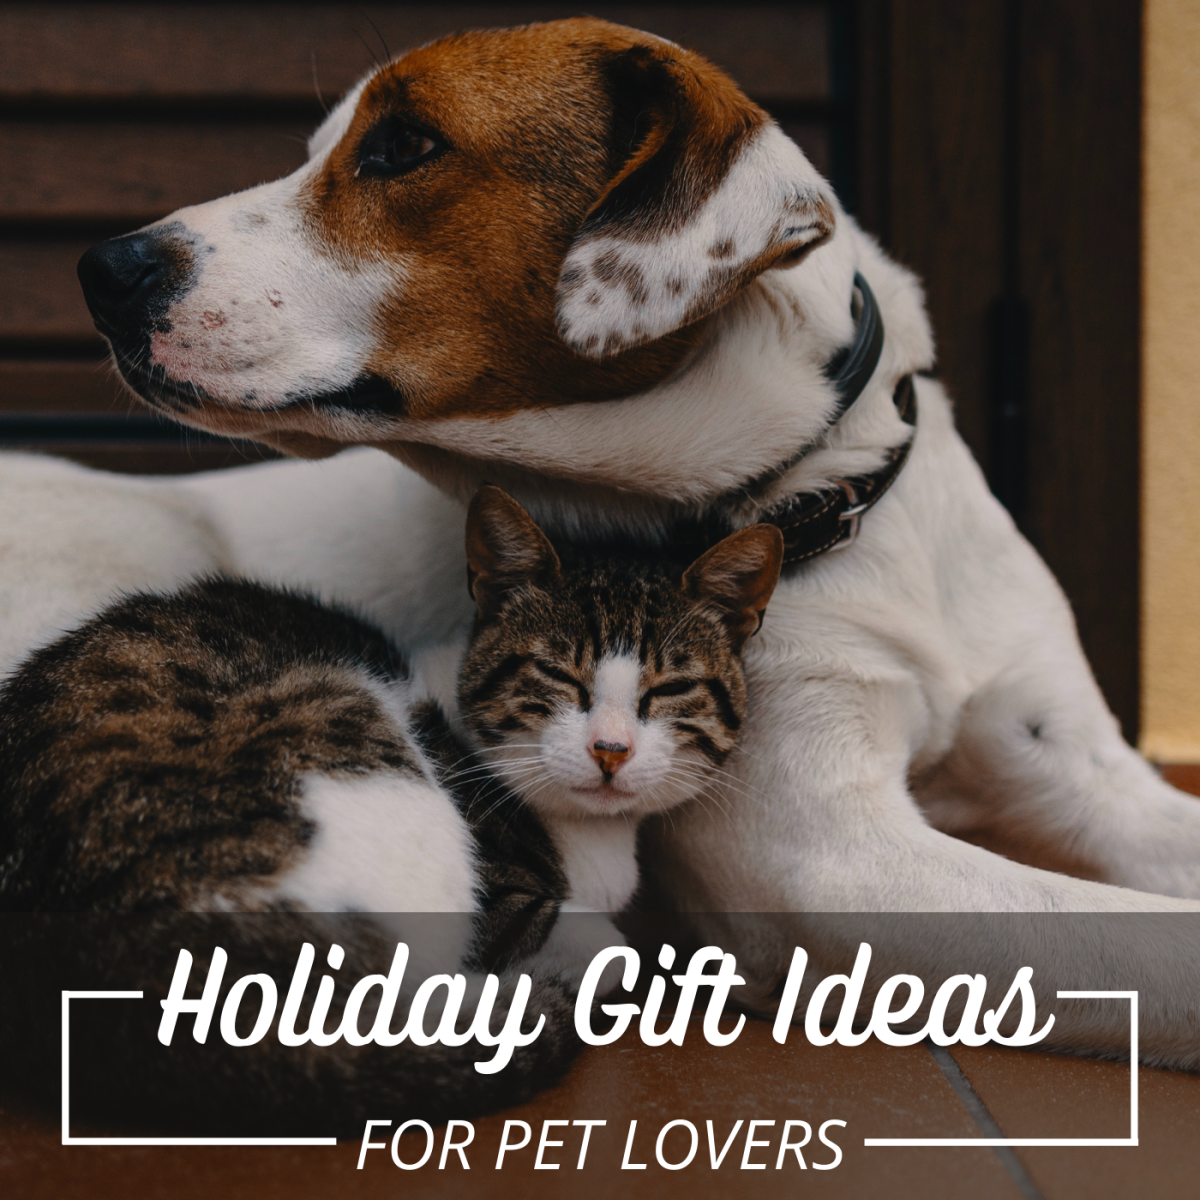 Holiday shopping for a pet-lover can be tricky if you don't know as much about their furry friend as they do. These ideas make a great starting point. 